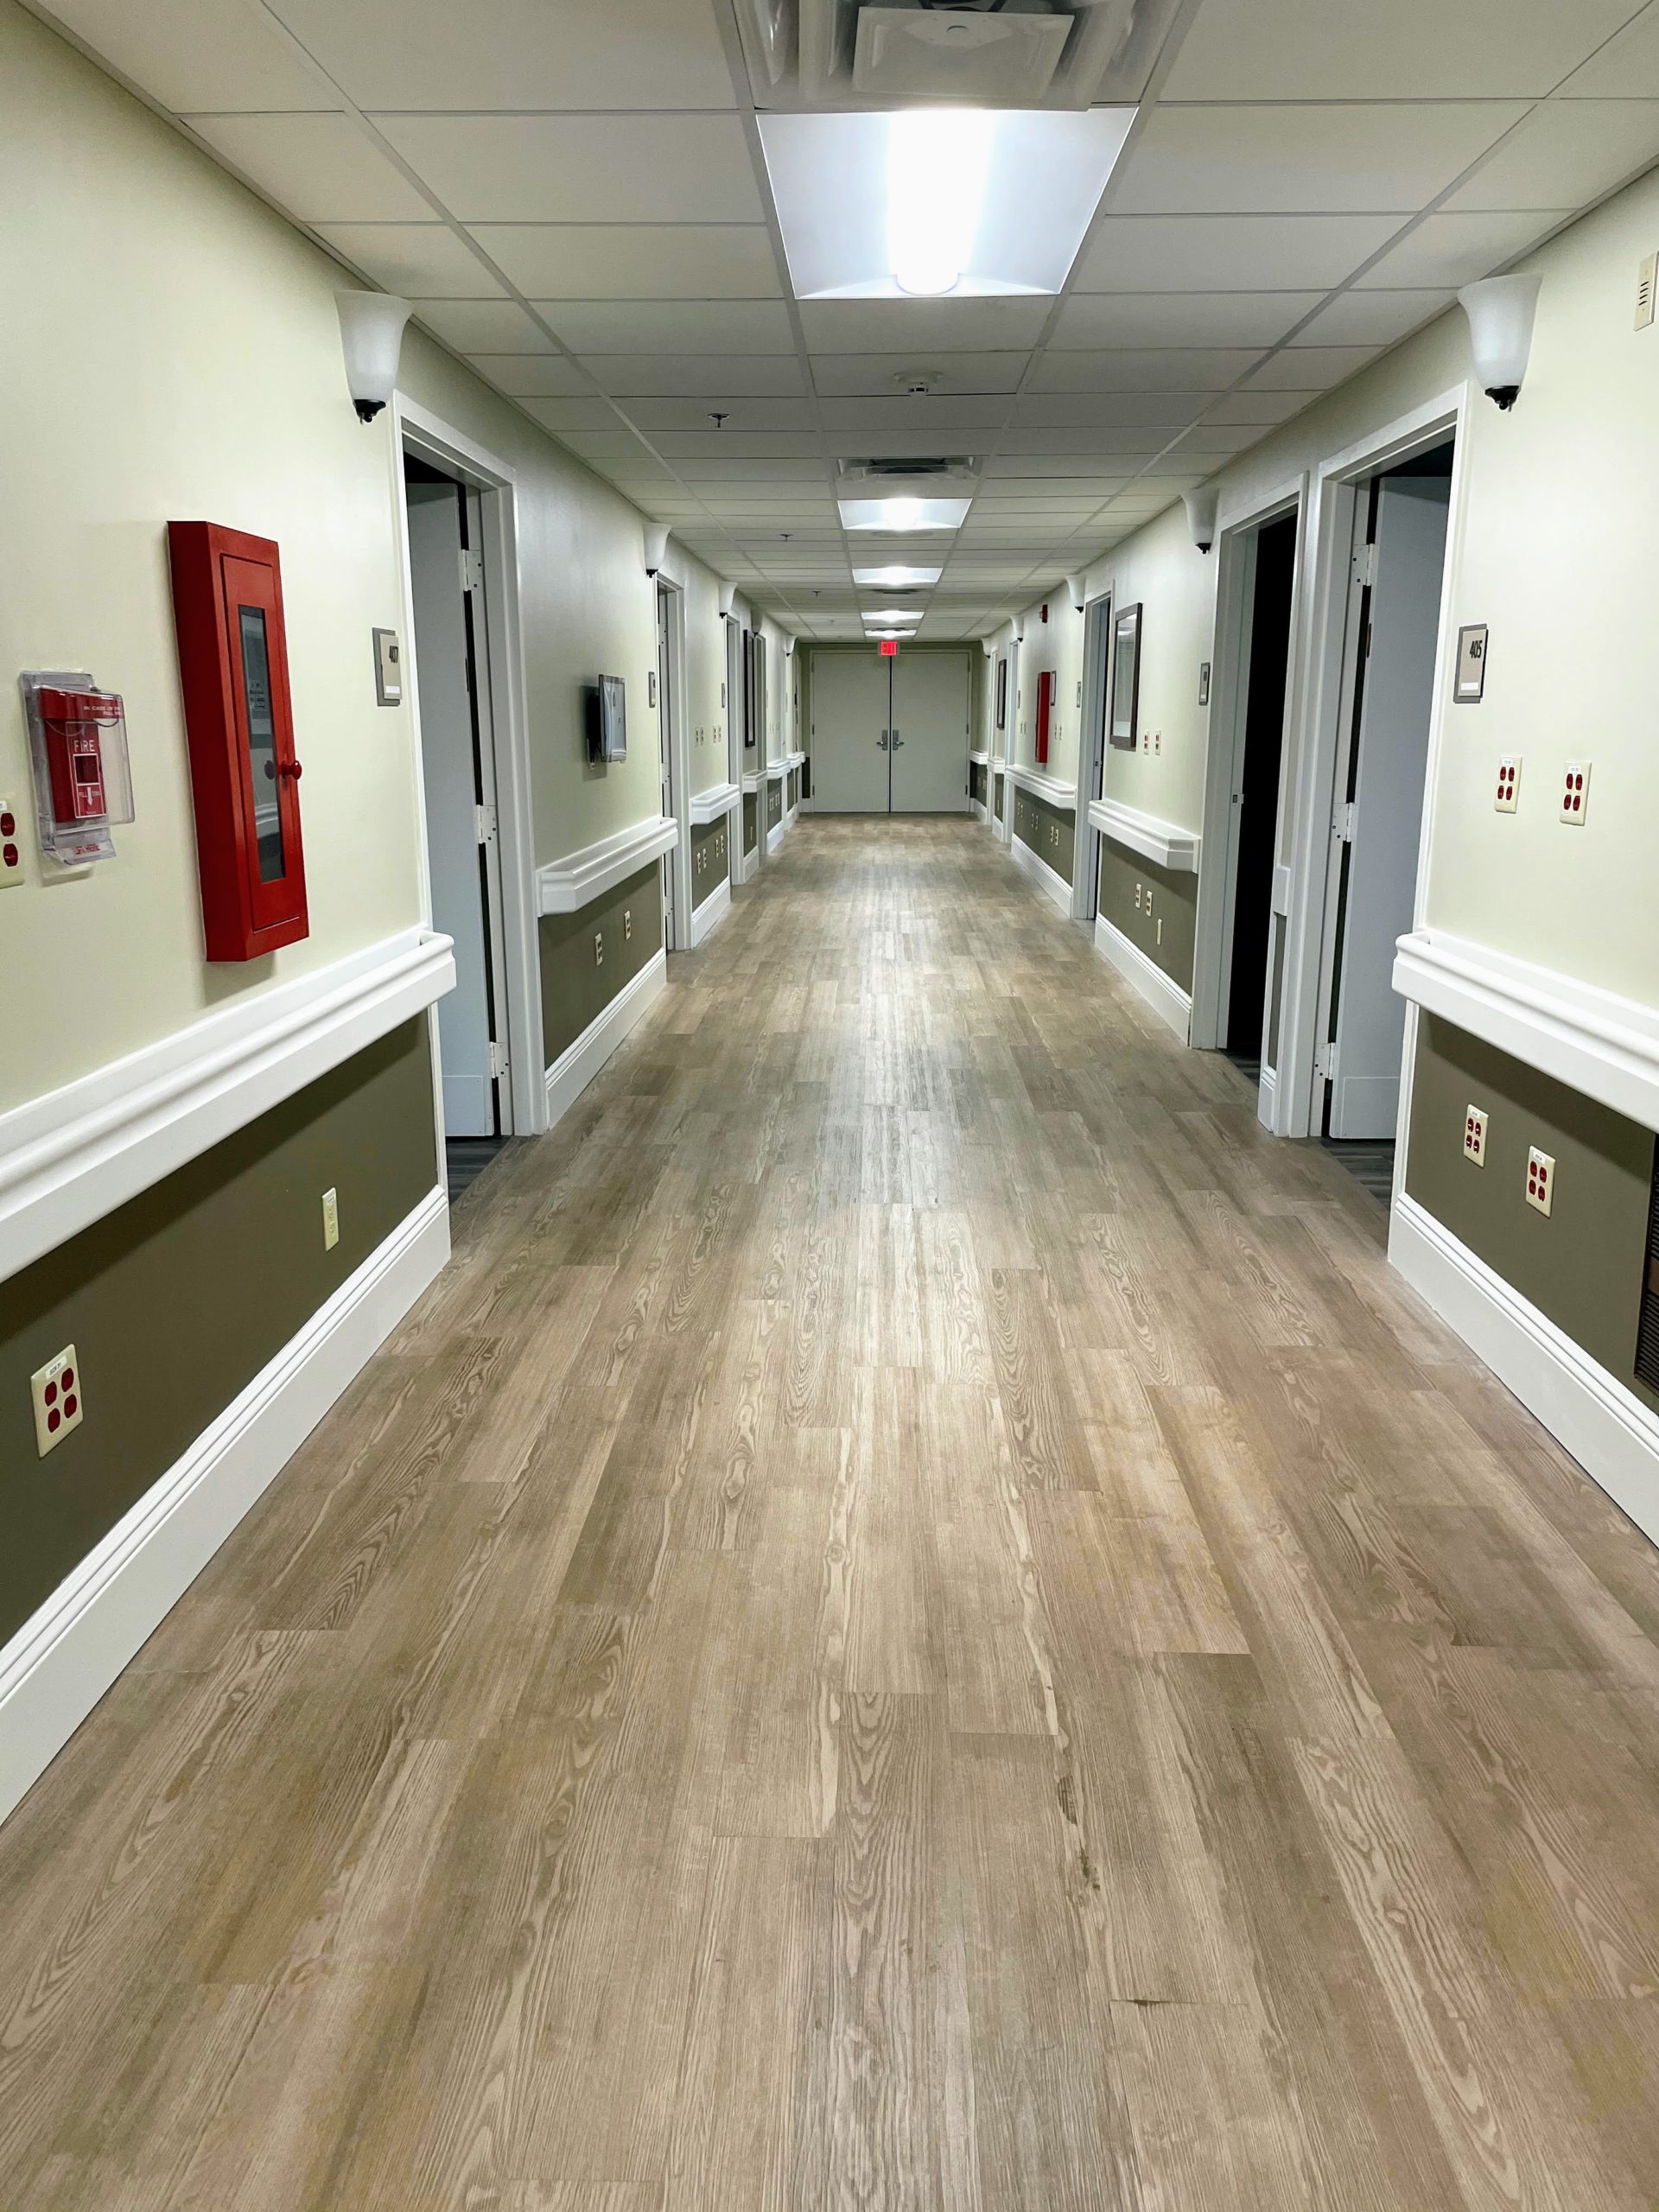 Ventilator Unit Hallway at Majestic Care of Connersville in Connersville, IN